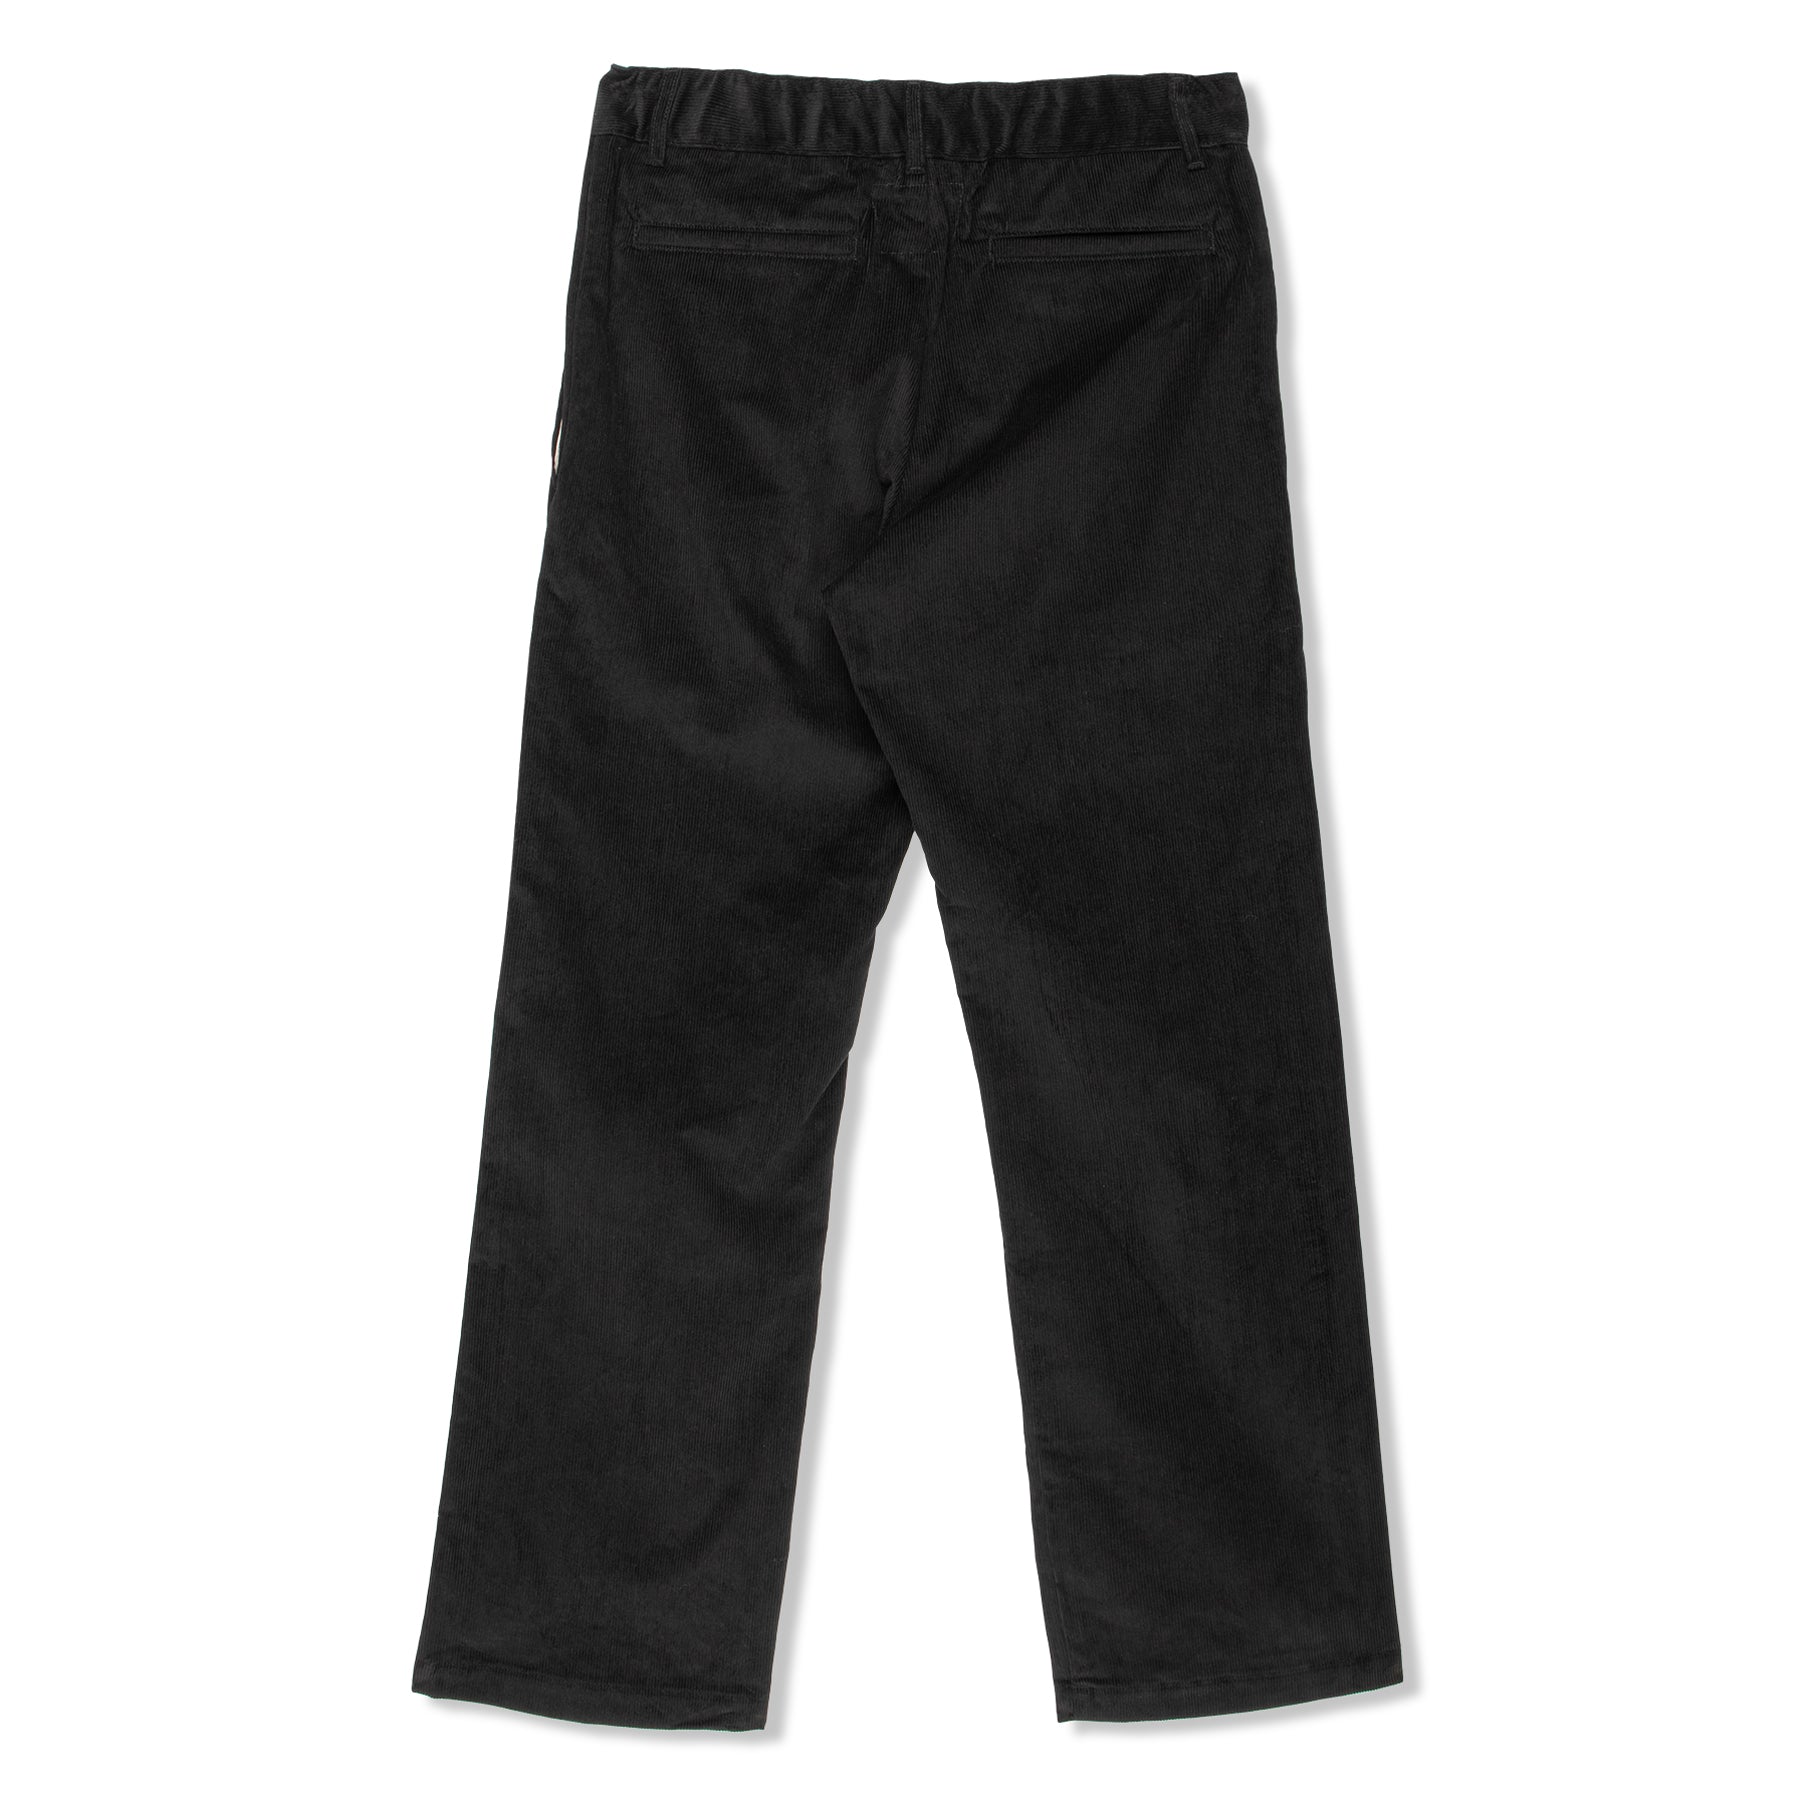 ONE OF THESE DAYS Coduroy Pant (Black) – Concepts